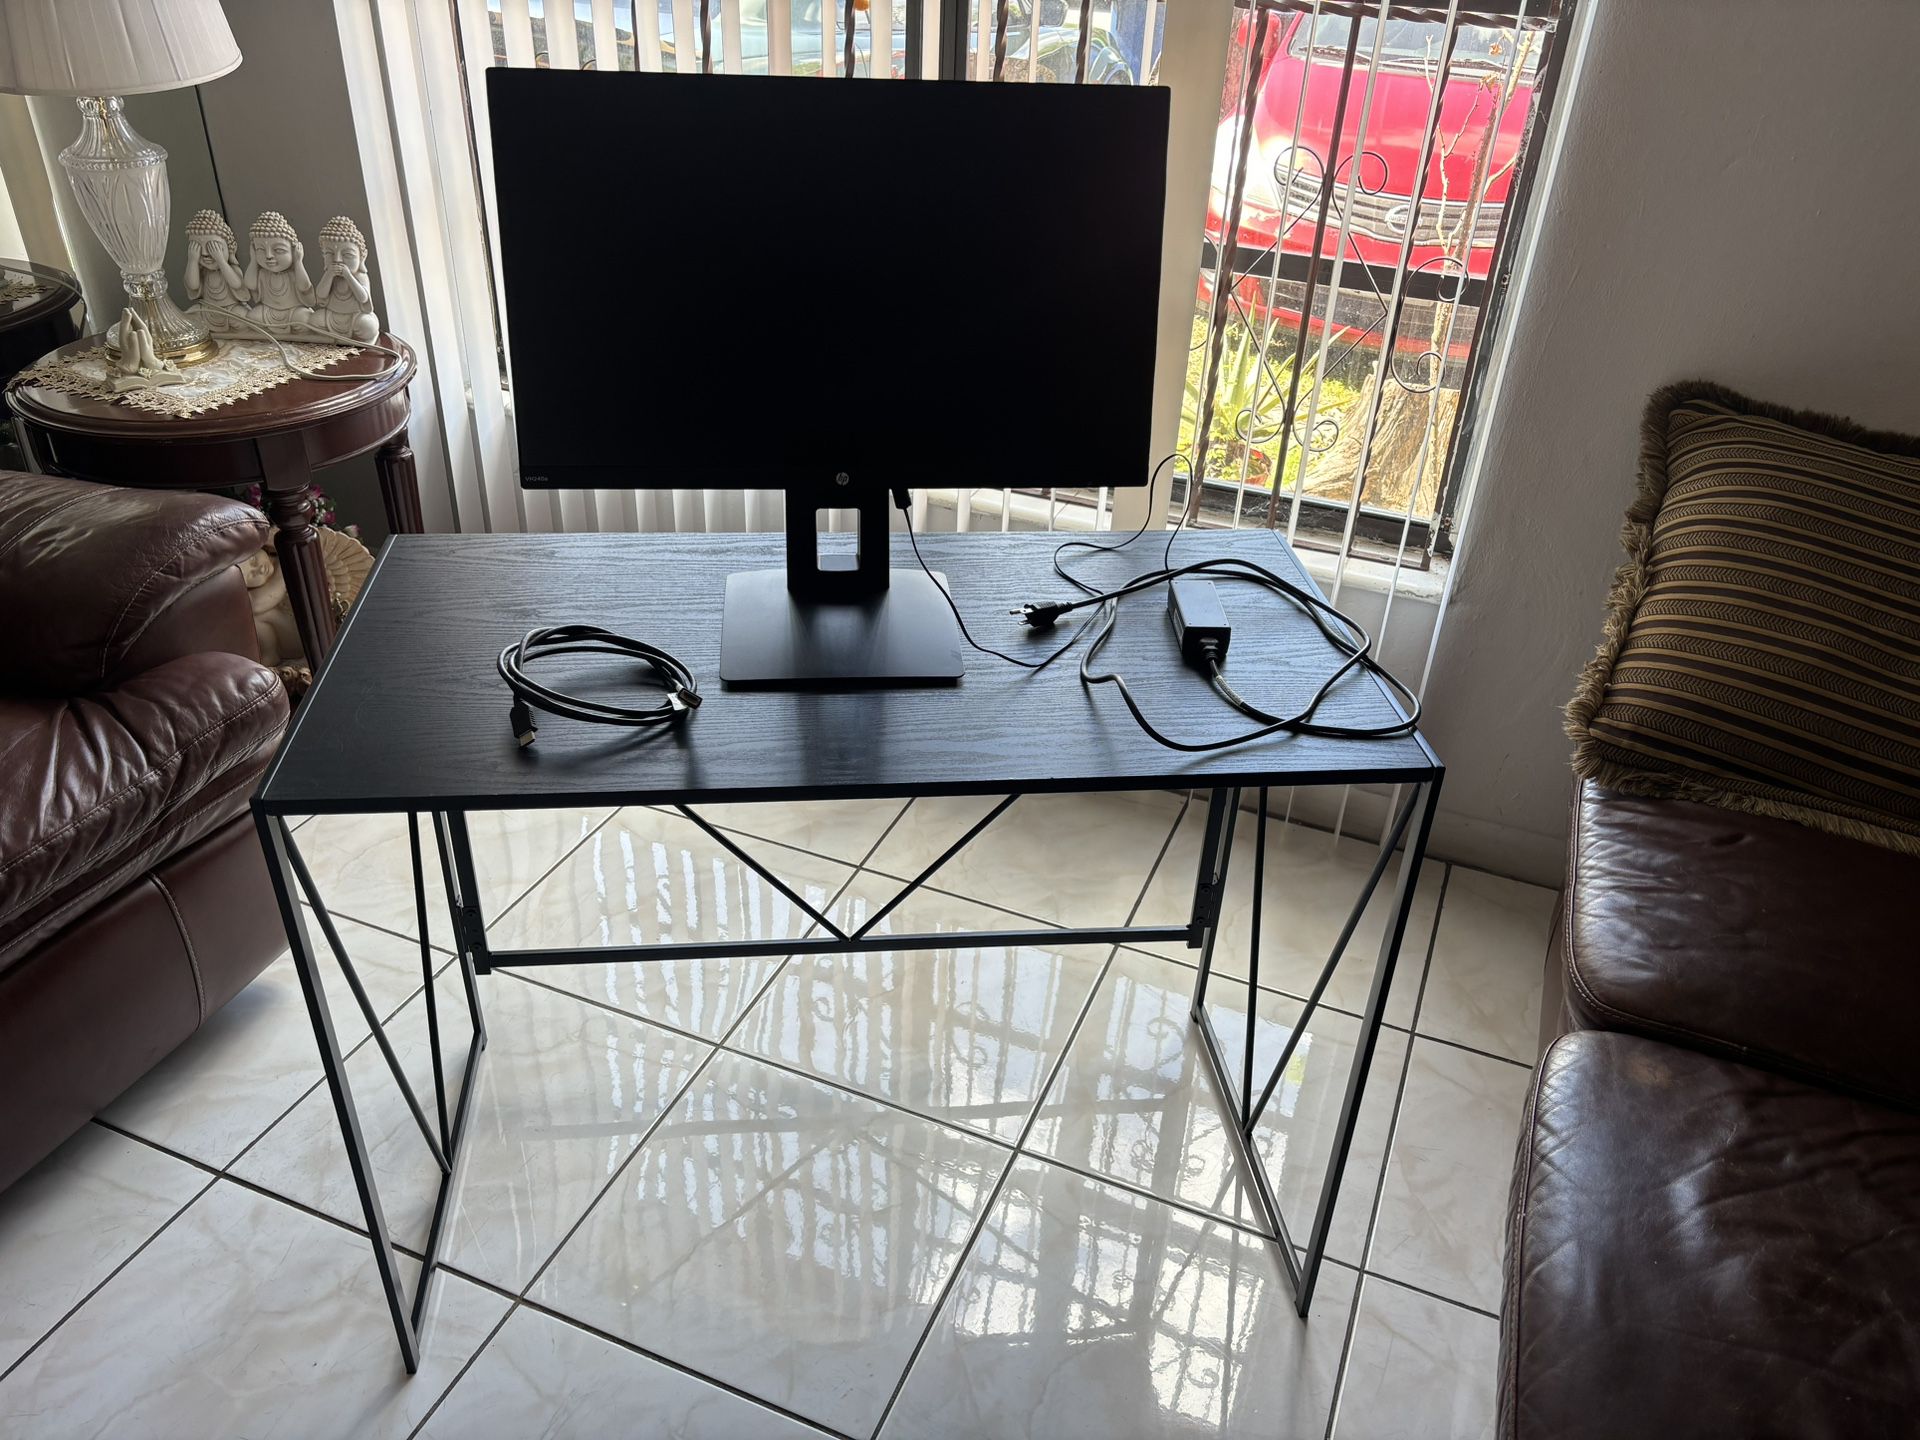 24” PC HP Monitor And Table